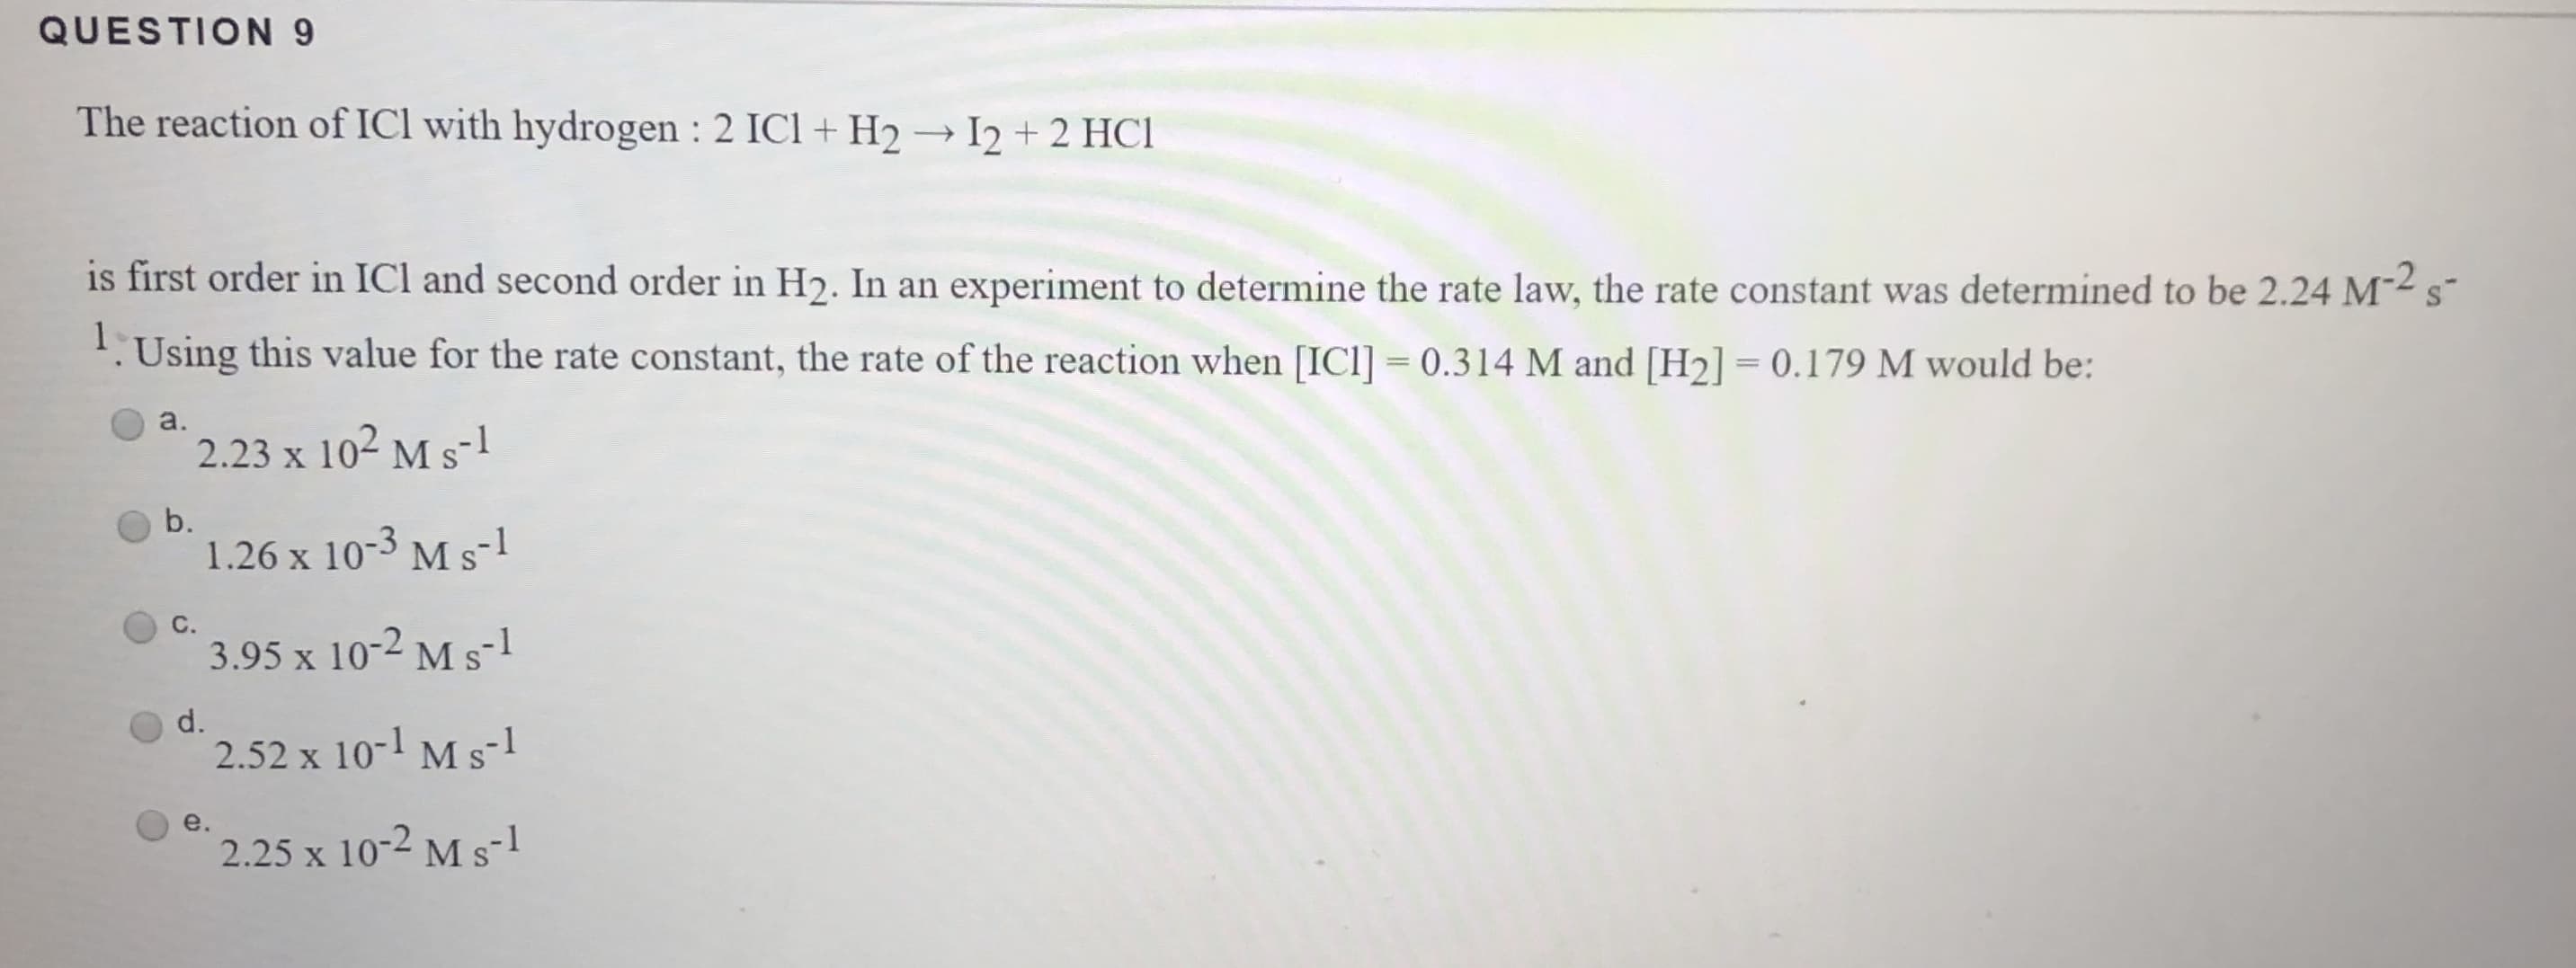 QUESTION 9
The reaction of ICl with hydrogen : 2 ICl + H2 I2 + 2 HCl
is first order in ICl and second order in H2. In an experiment to determine the rate law, the rate constant was determined to be 2.24 M
S
s
1.Using this value for the rate constant, the rate of the reaction when [ICl] 0.314 M and [H2] = 0.179 M would be:
a.
2.23 x 102 M s
b.
1.26 x 10-3 M s1
С.
3.95 x 10-2 M s1
d.
2.52 x 10- M s- 1
e.
2.25 x 10-2 M s 1
